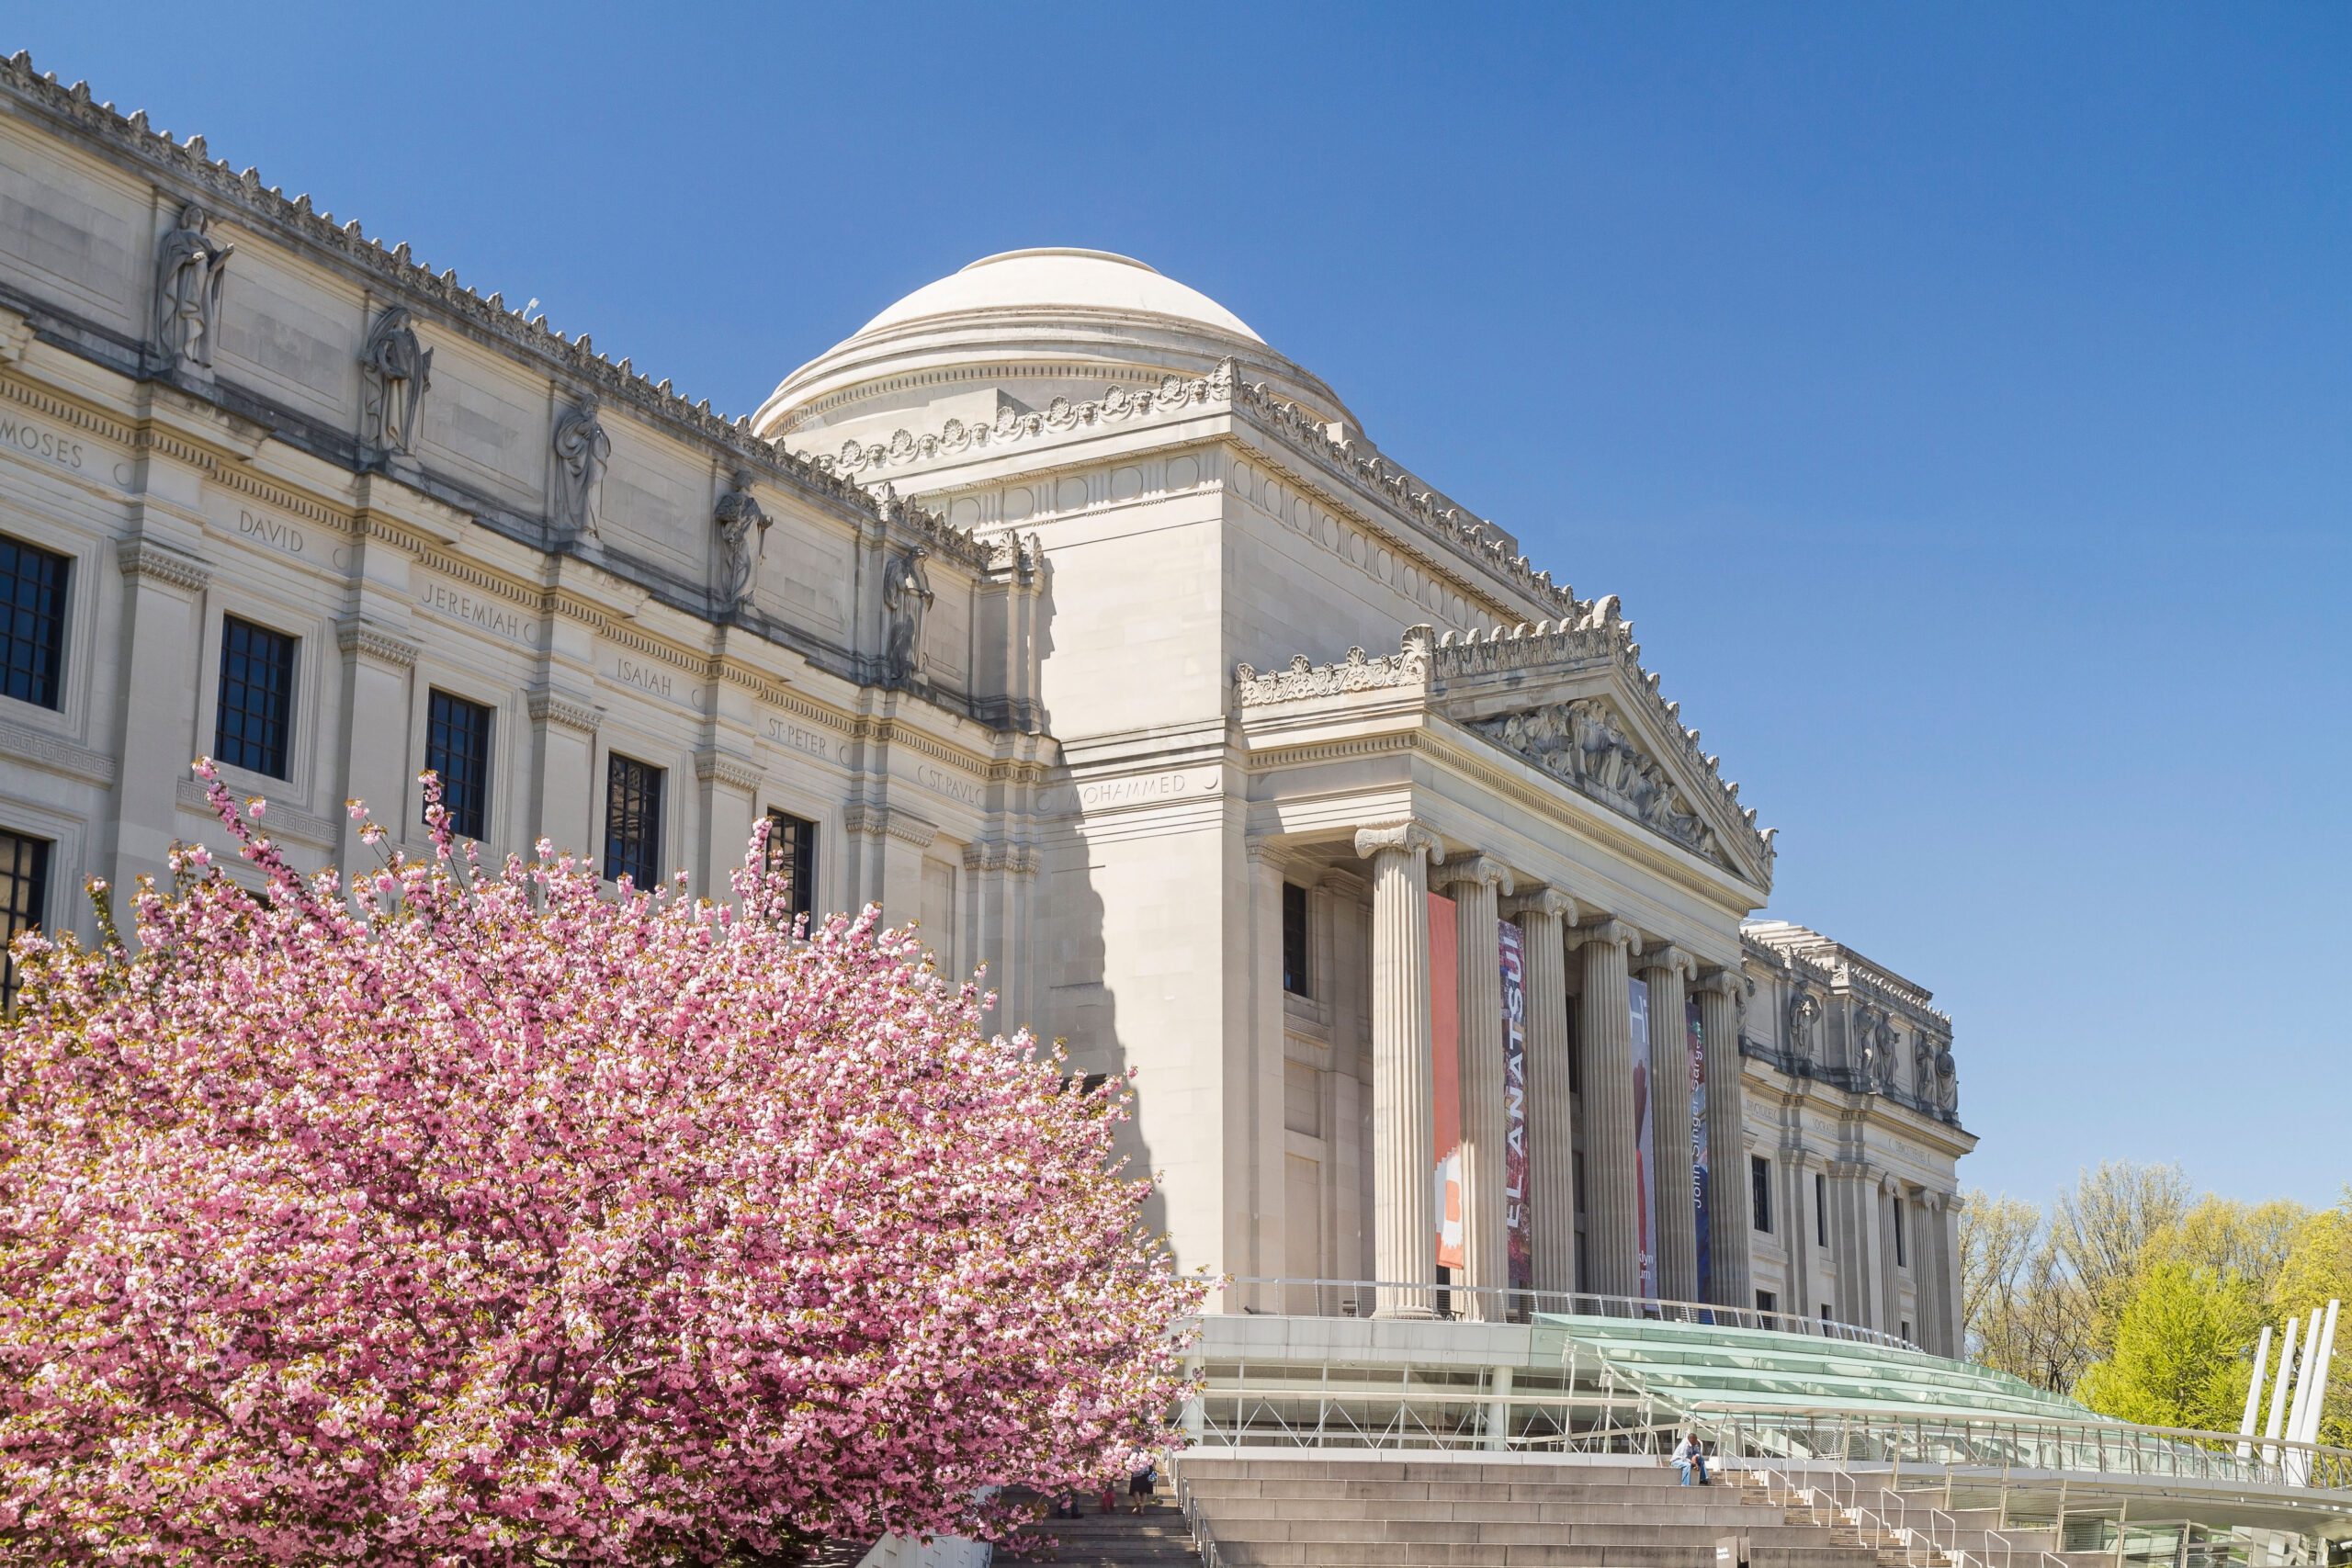 Cherry trees in full bloom in front of the Brooklyn Museum in Brooklyn, New York. Colin D. Young / Alamy Stock Photo